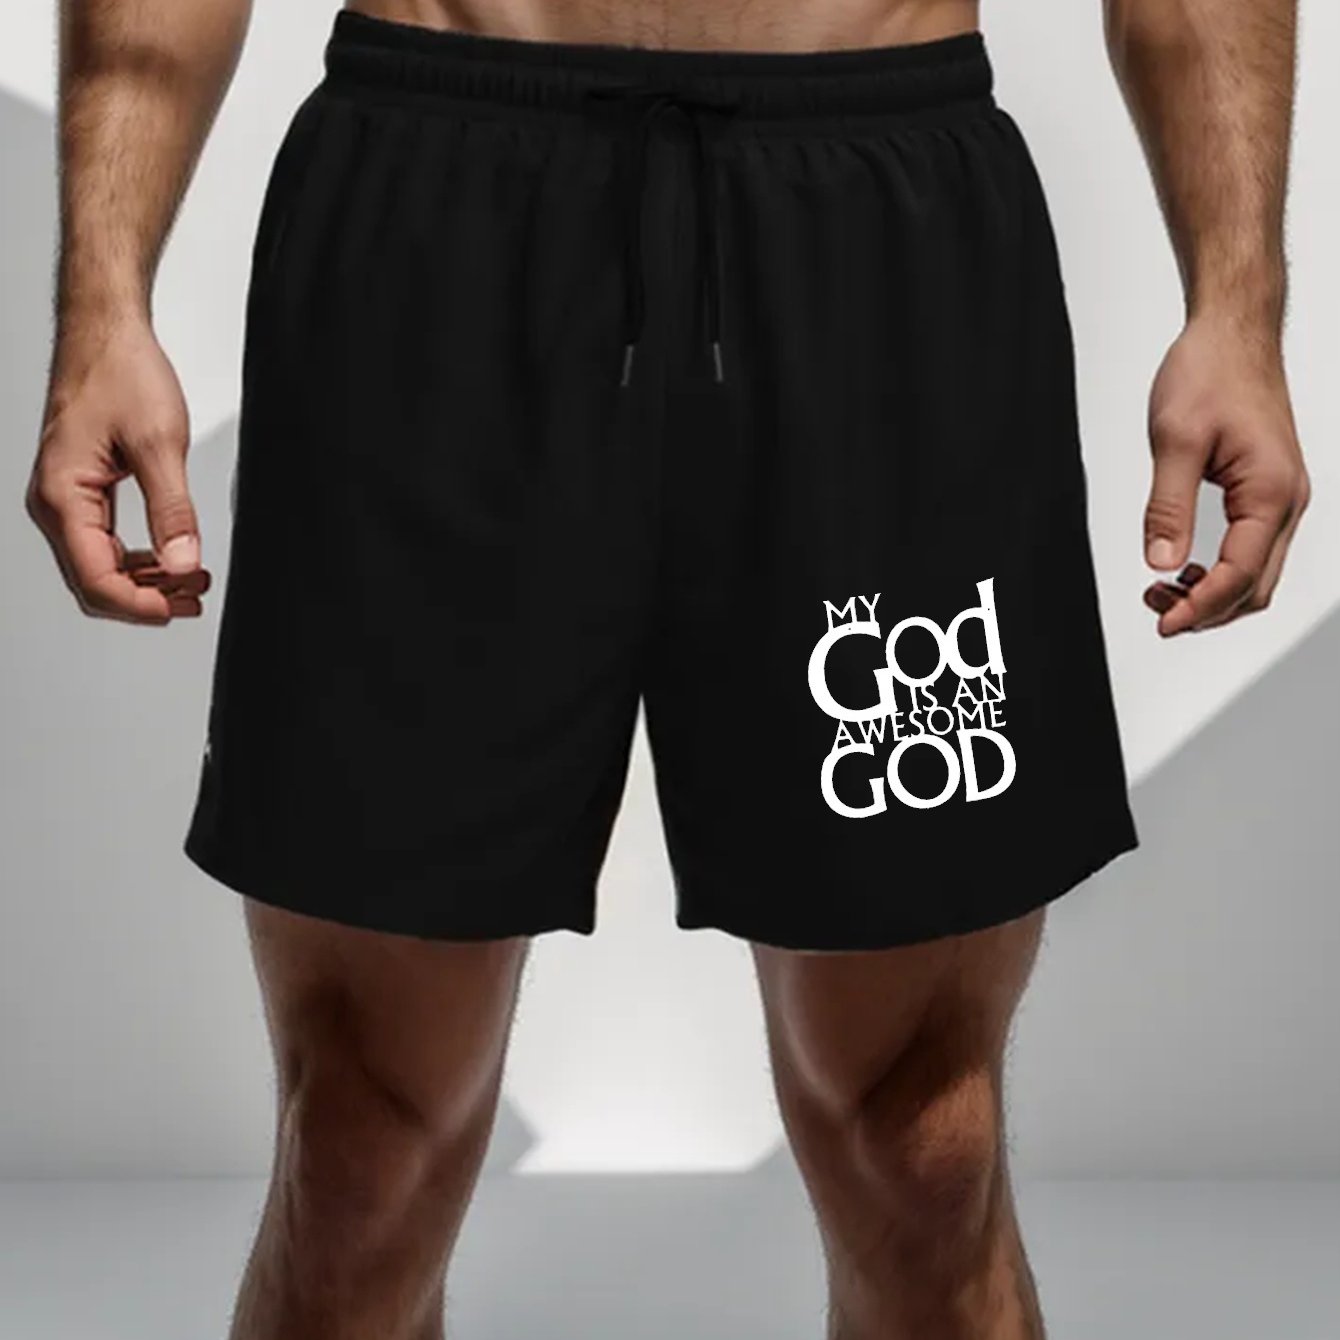 My God Is An Awesome God Plus Size Men's Christian Shorts claimedbygoddesigns